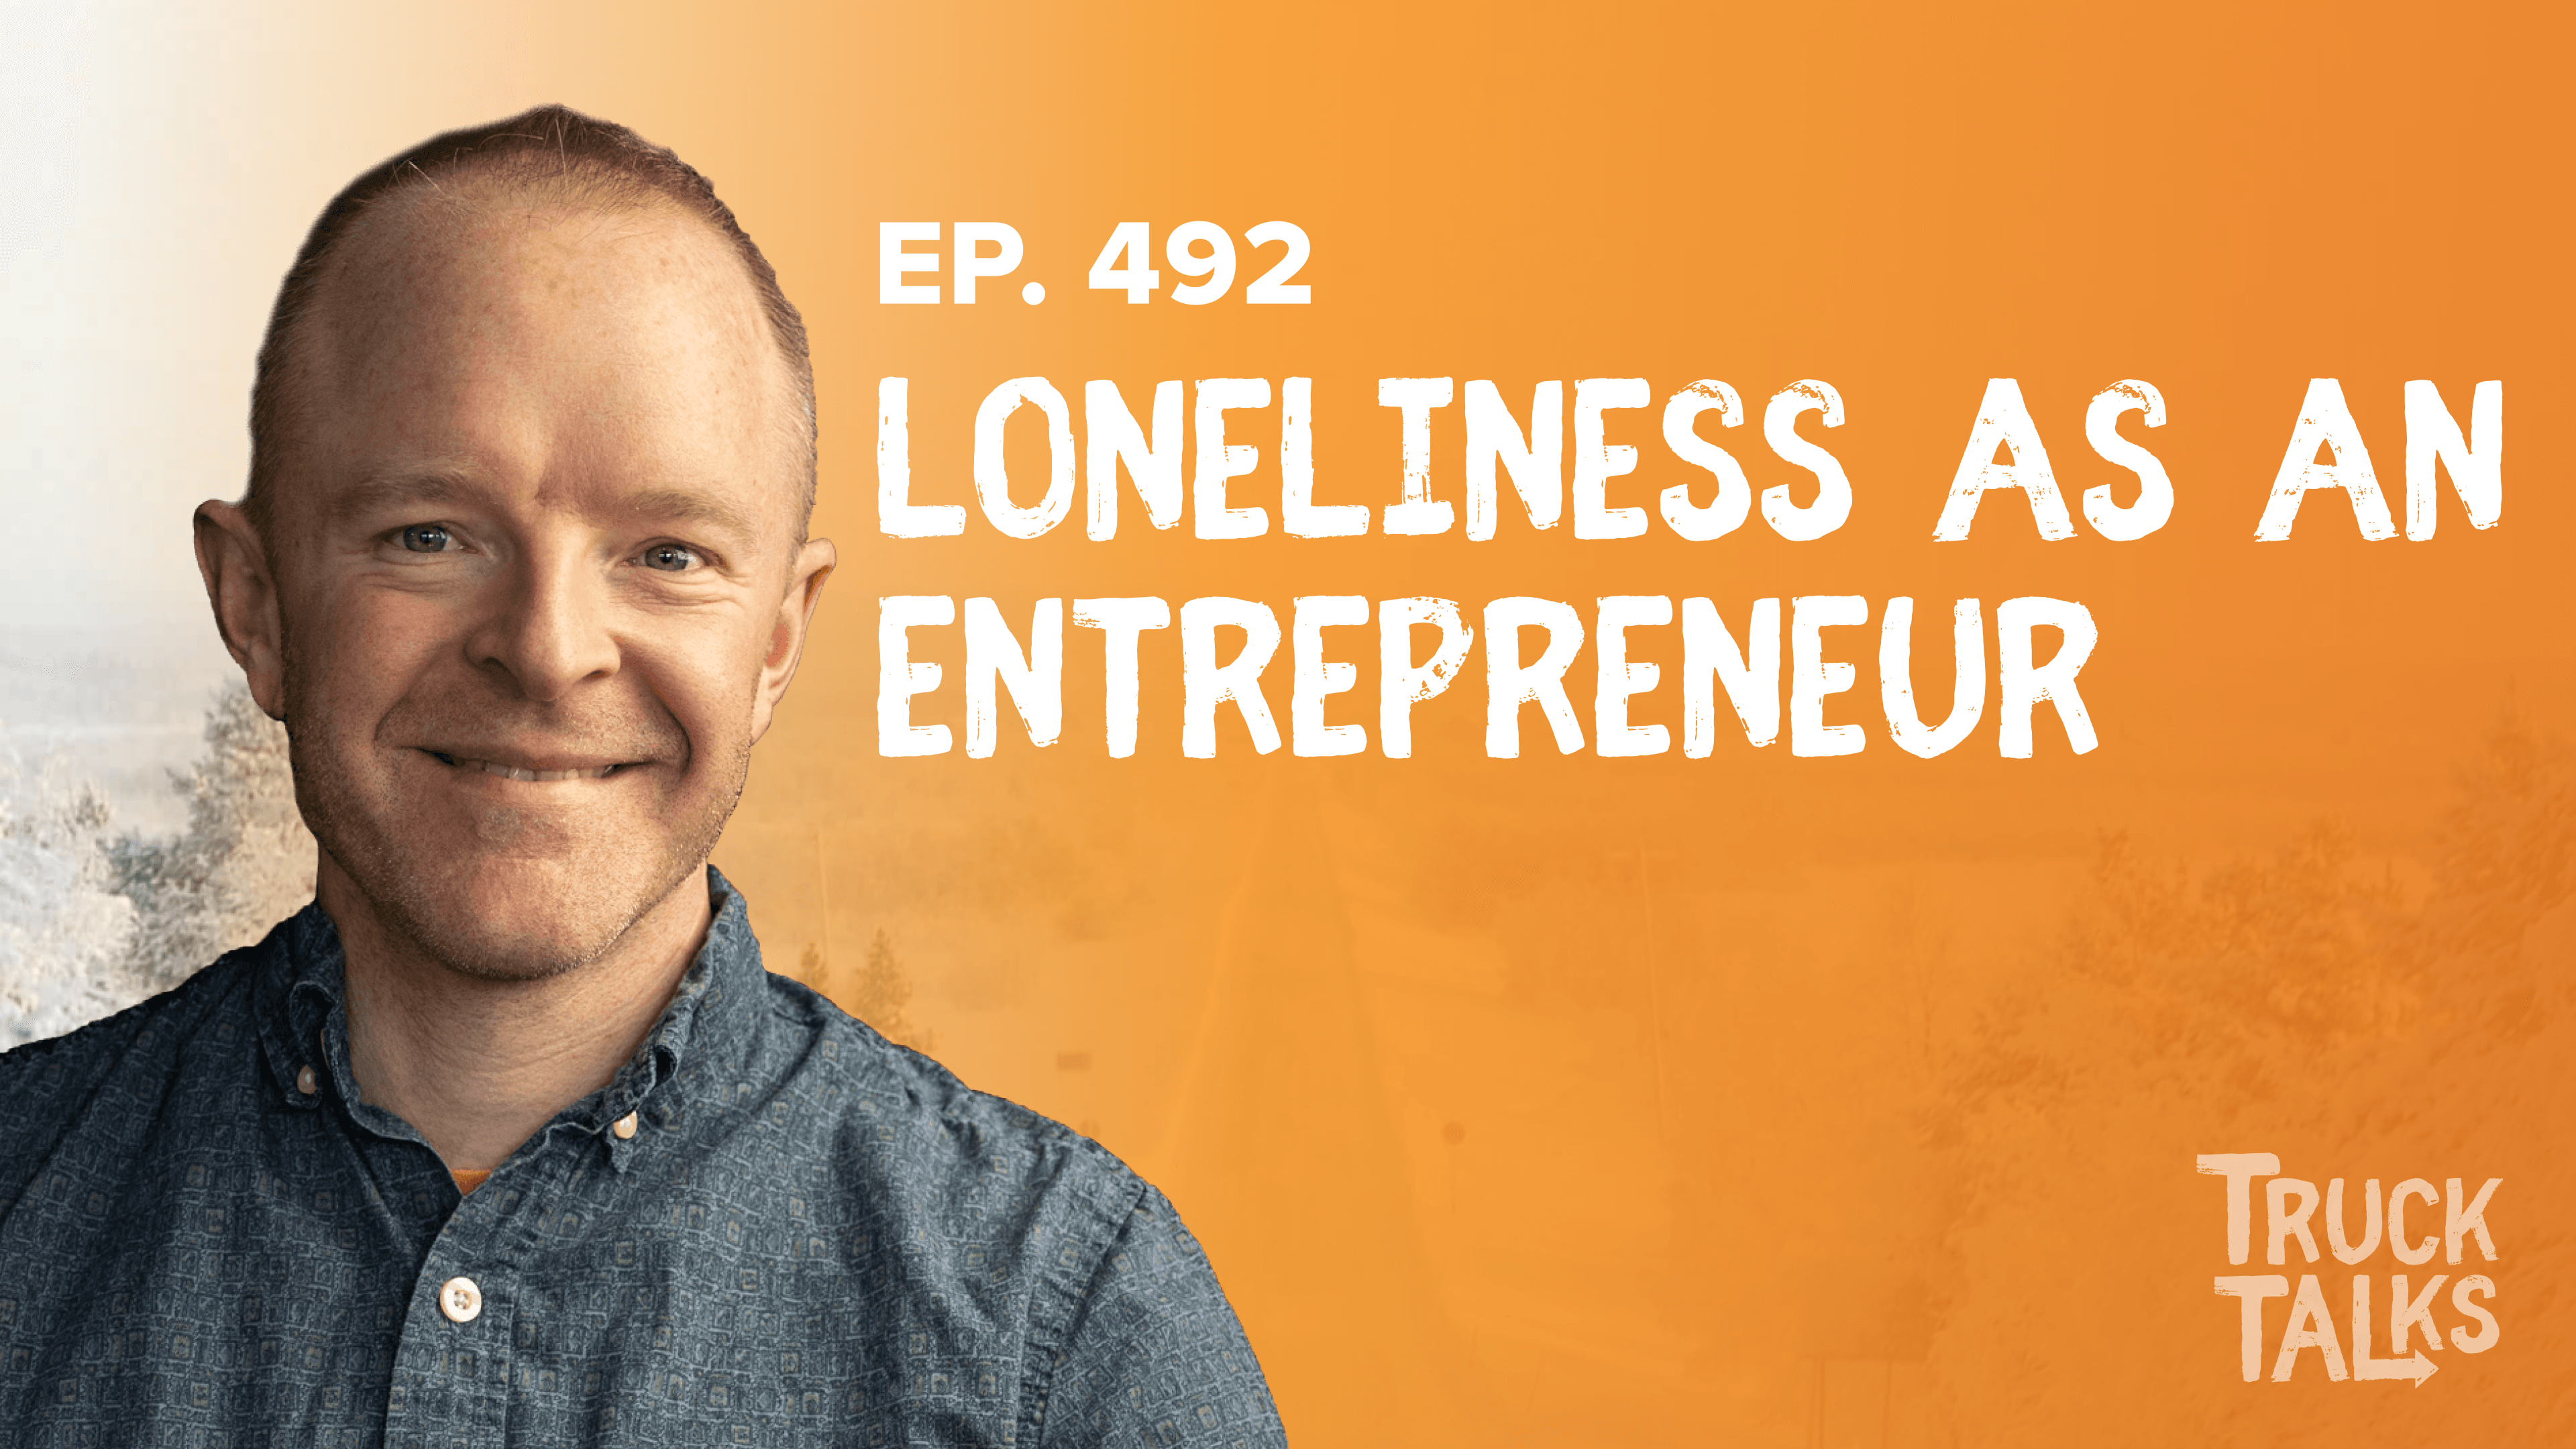 Loneliness as an Entrepreneur & 4 Ways to Combat It